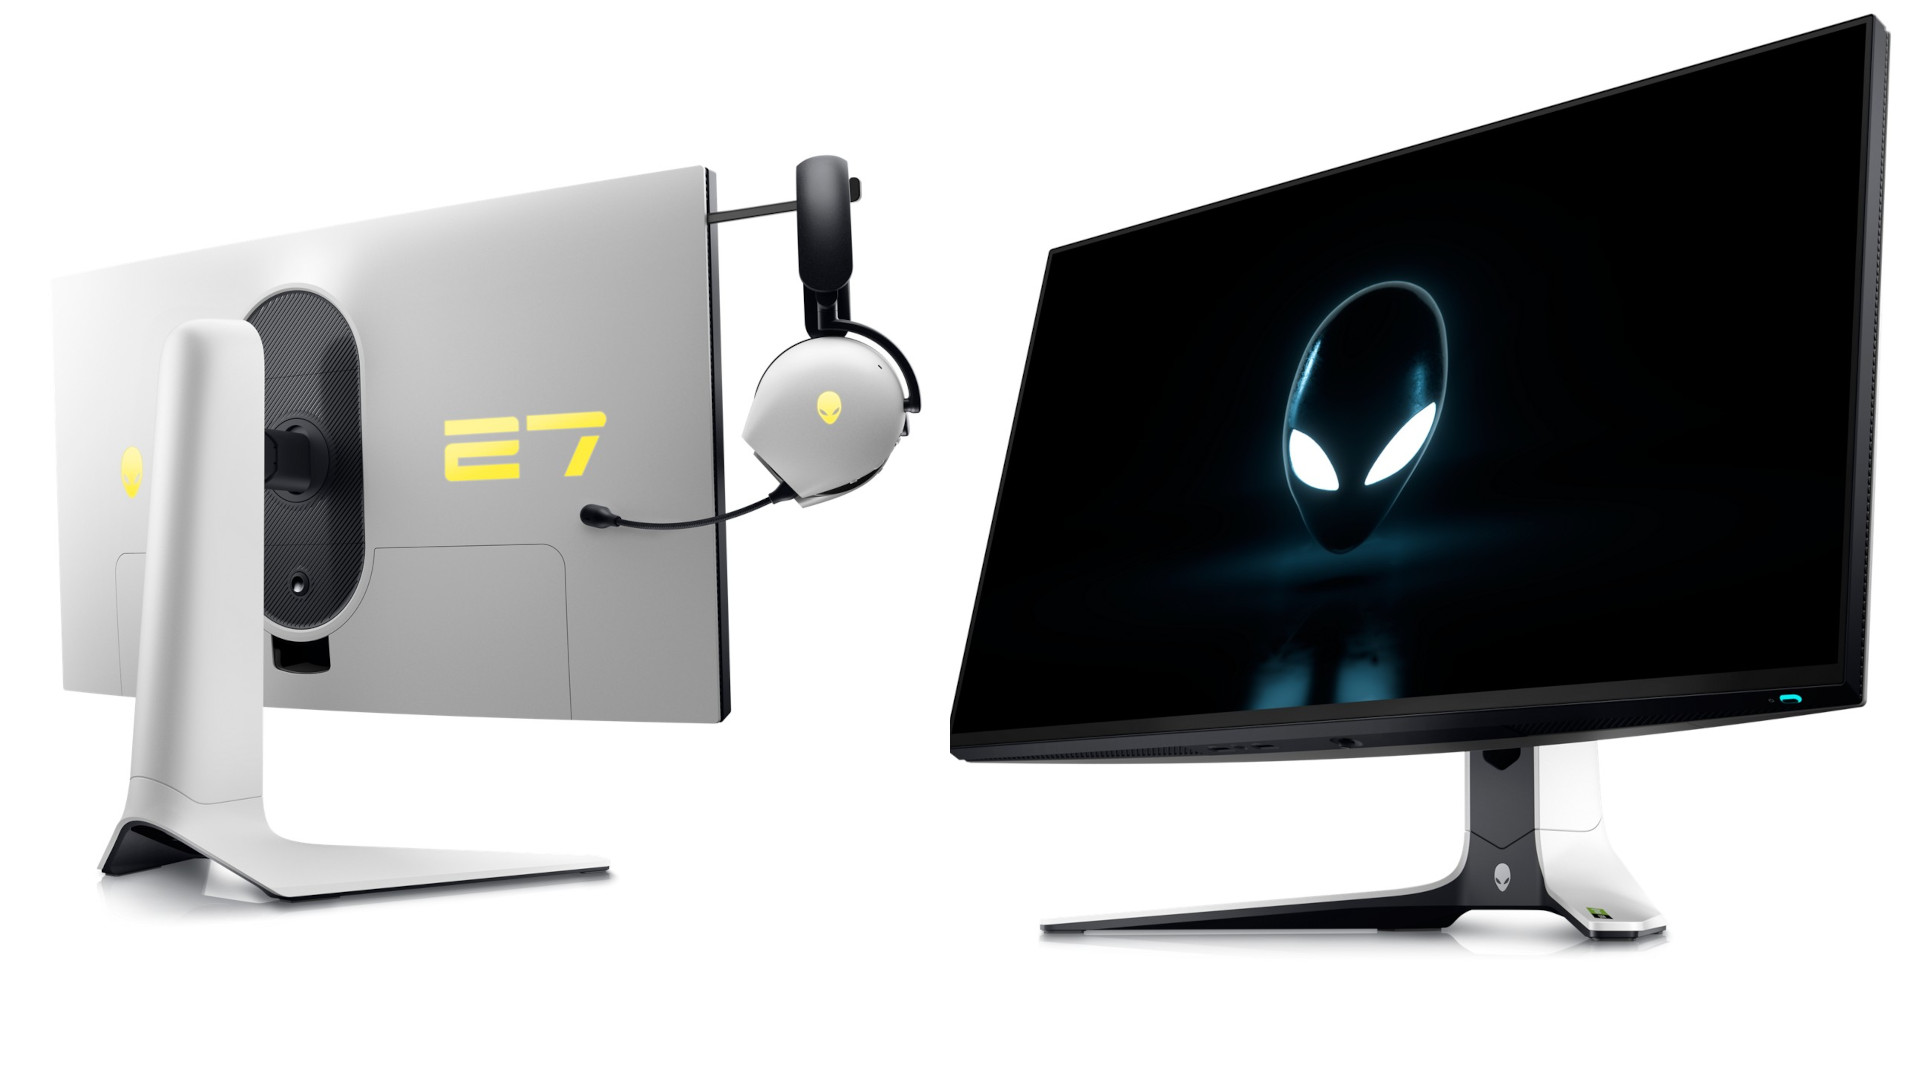 Deal Alert: Alienware 25 Gaming Monitor with 240Hz Refresh Rate, 1ms  Response Time for Just $292.59